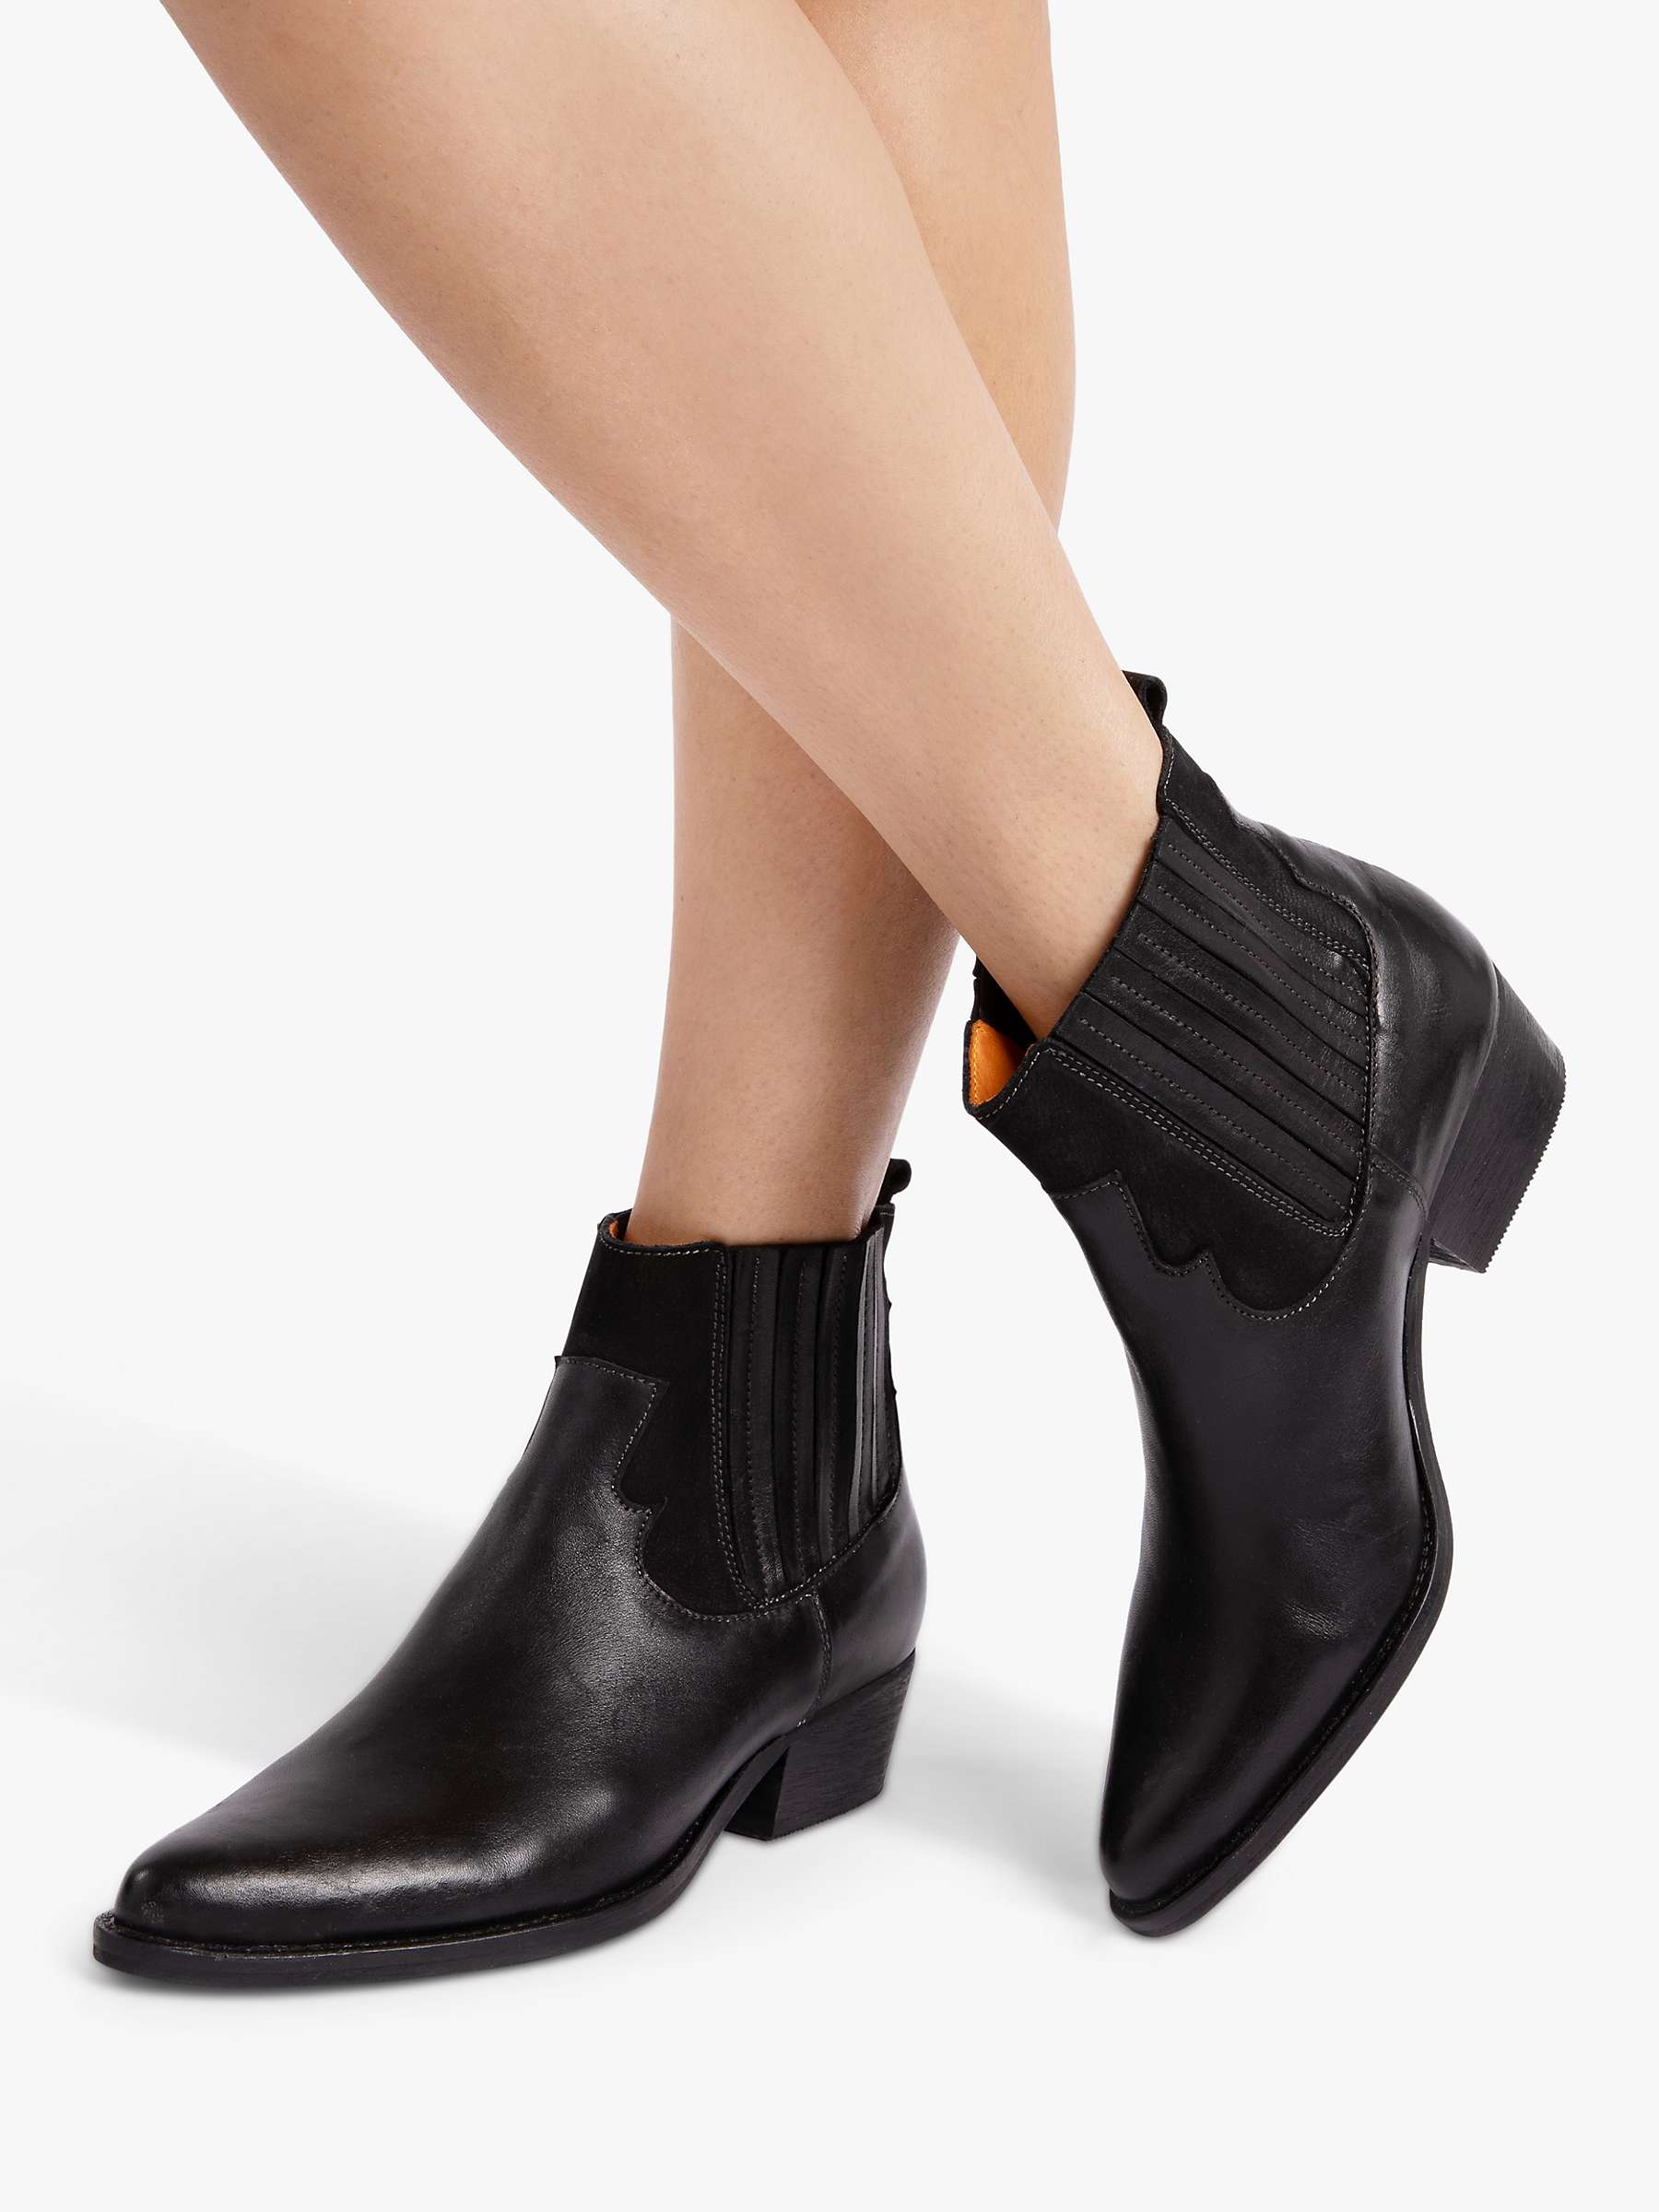 Penelope Chilvers Frontier Leather Cowboy Boots, Black at John Lewis ...